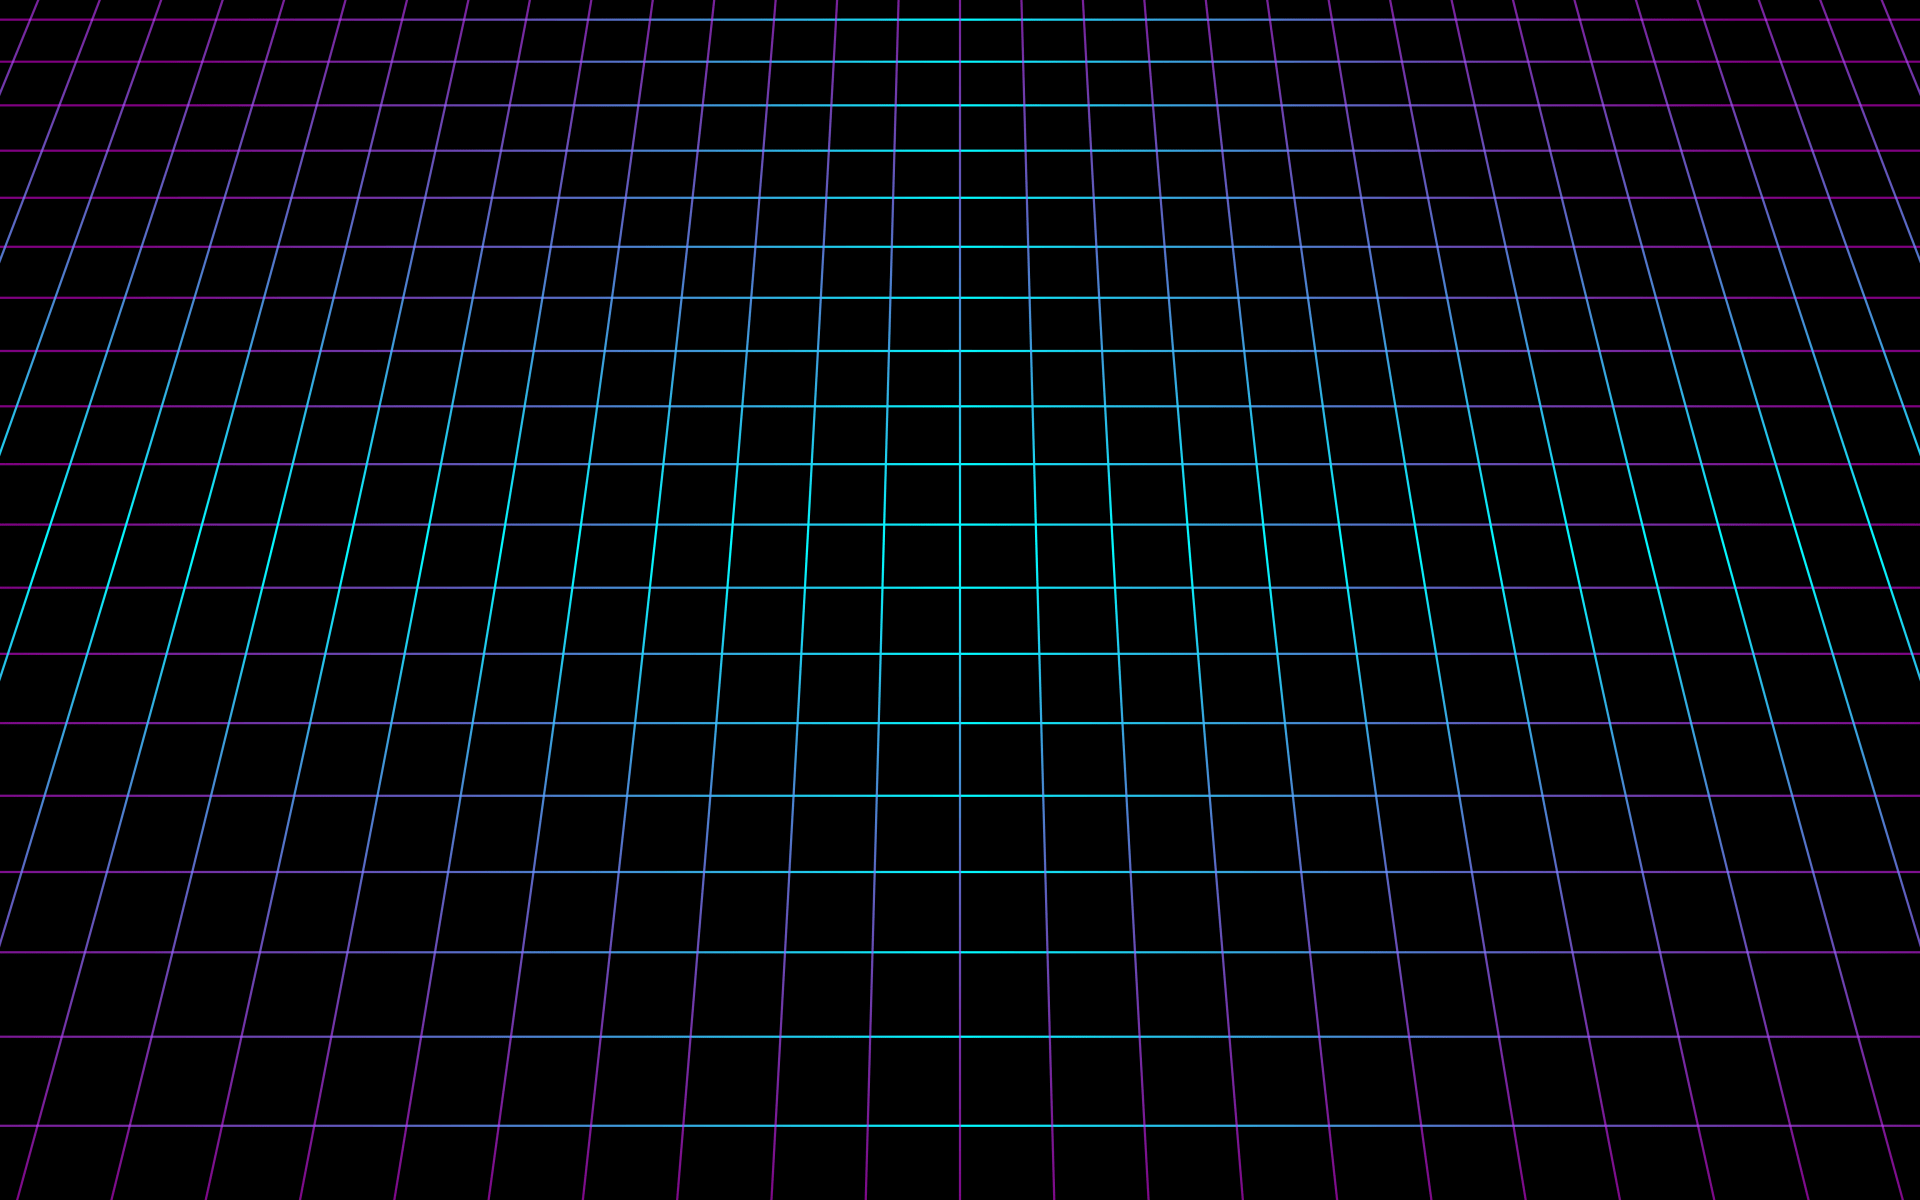 A black and purple grid on the screen - Grid